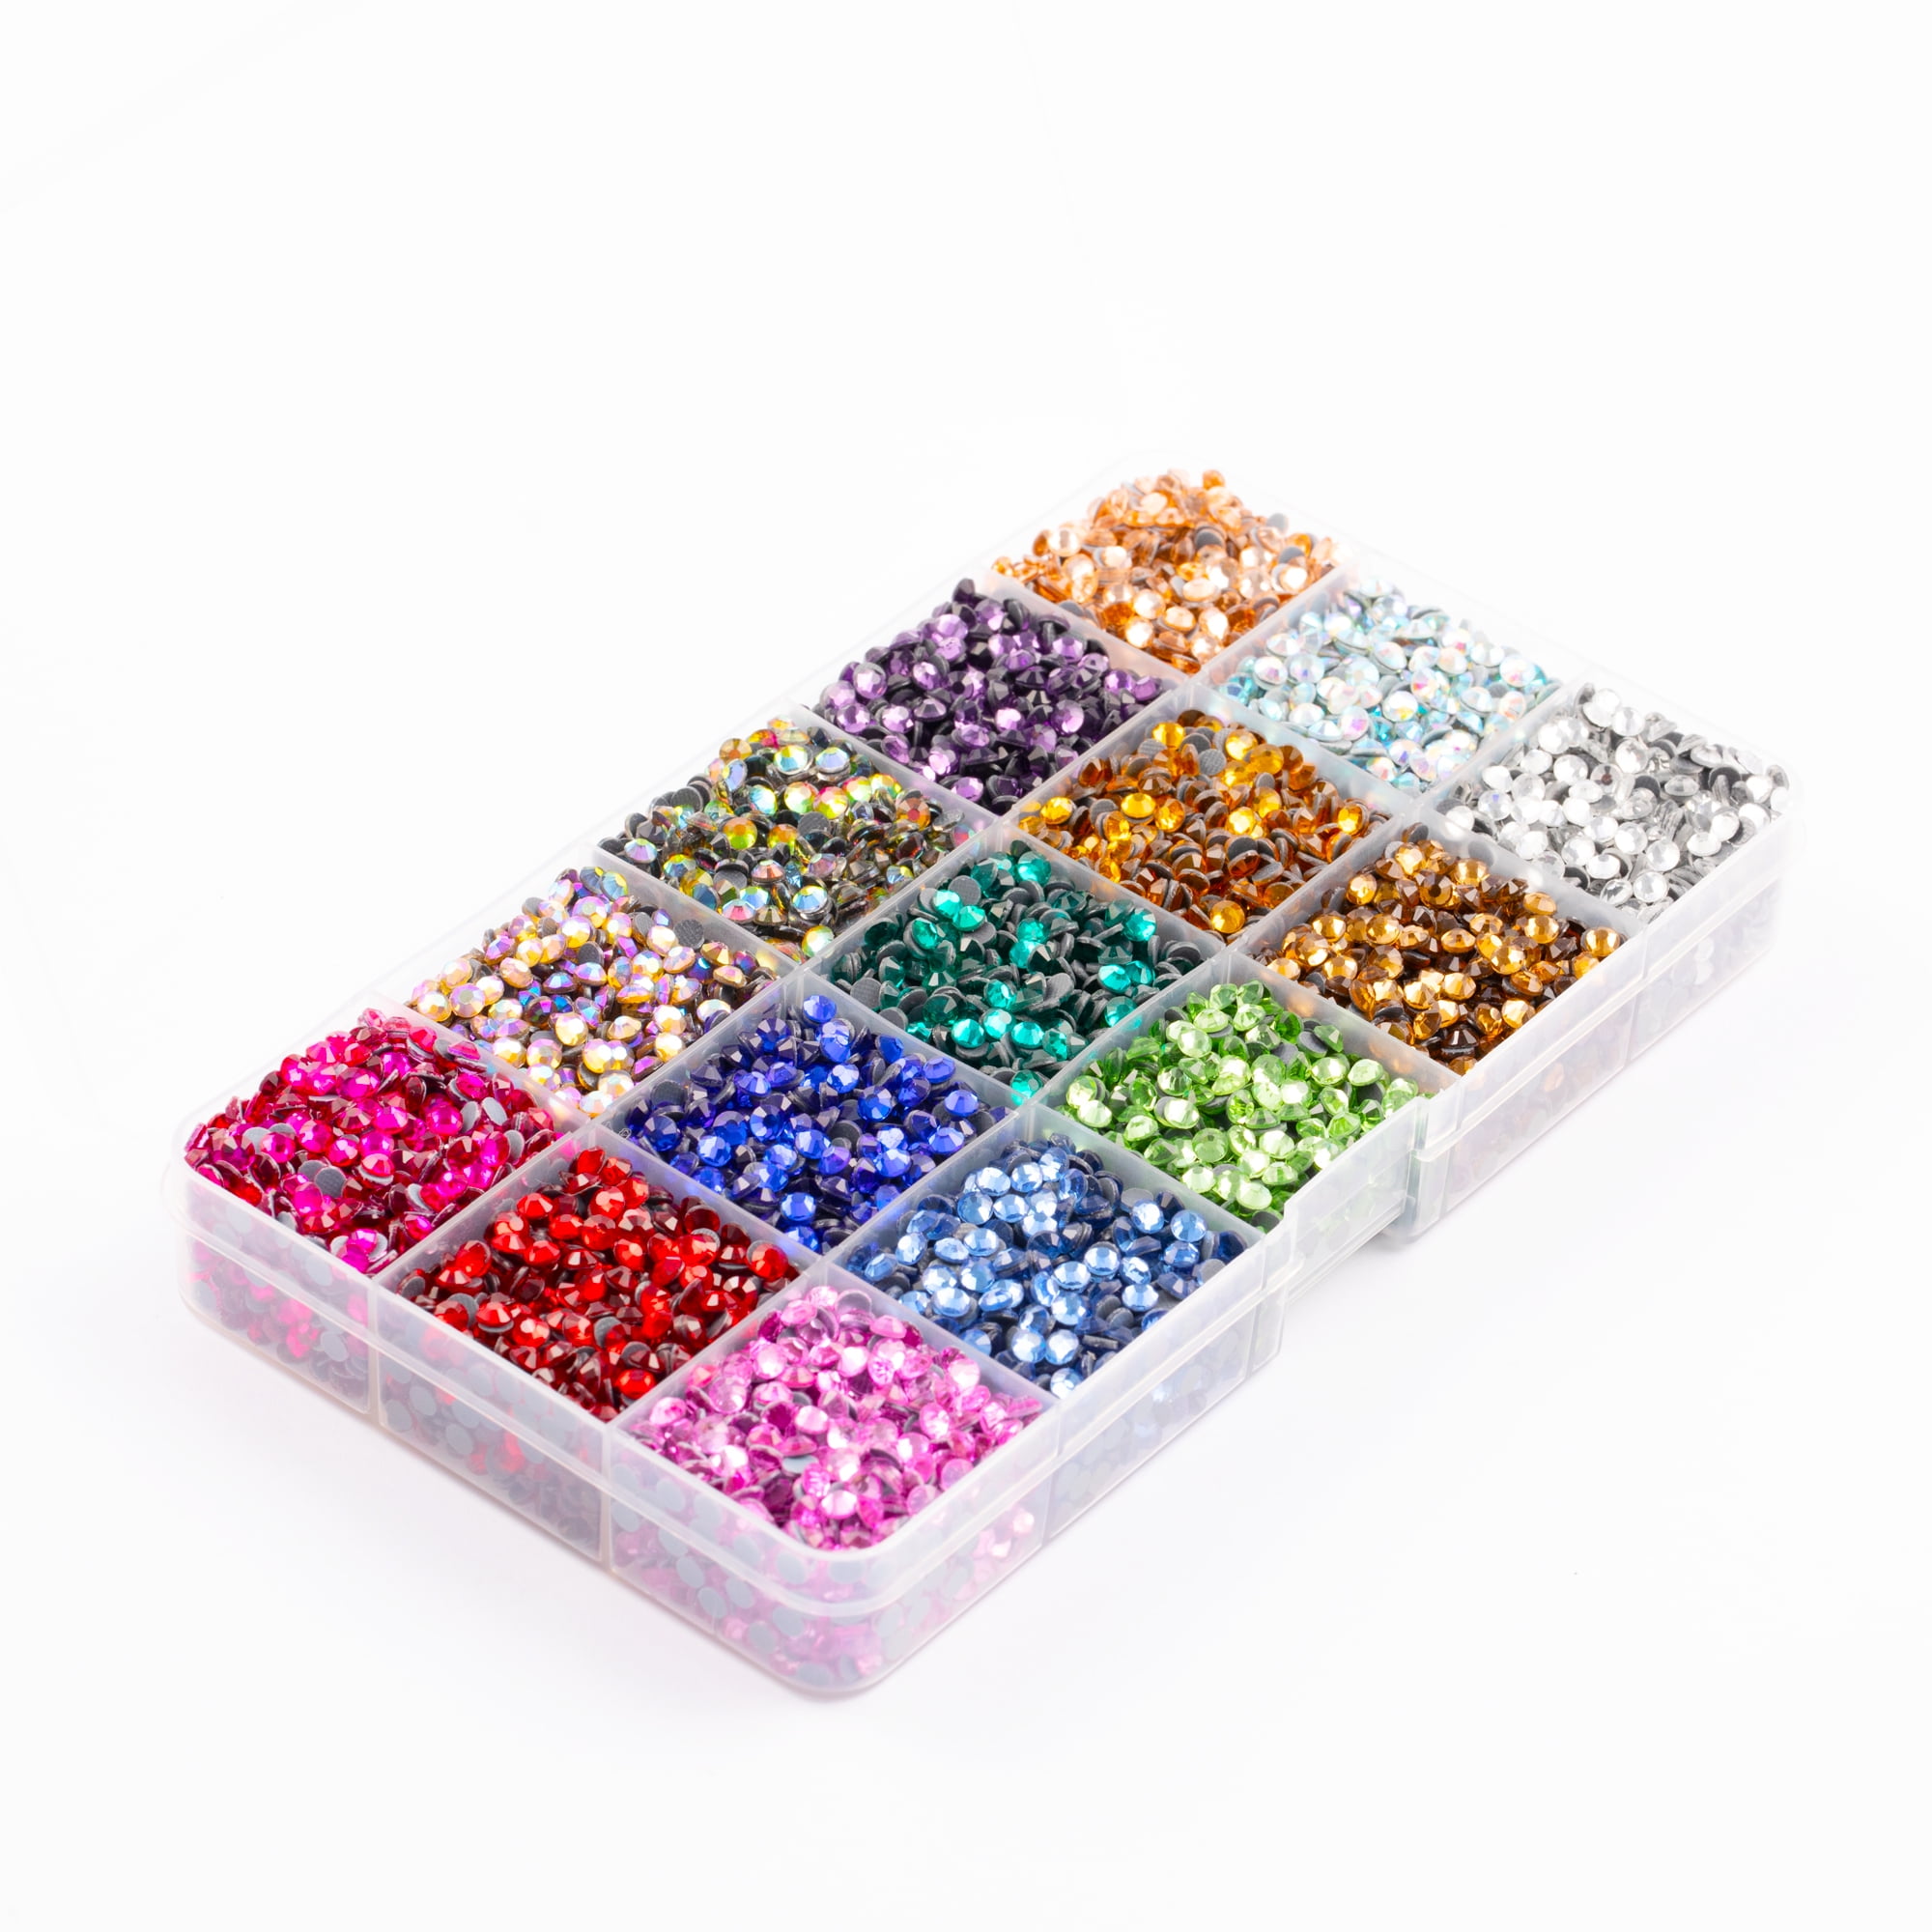 Bella Dezigns - *BEDAZZLER STARTER KIT* INCLUDES: 1 x Crystal Wand (with  case) 1 x 25ml B-7000 Adhesive Glue 1 x Small Rhinestone Picker Plate 1 x  Crystal Wand replacement head LIMITED